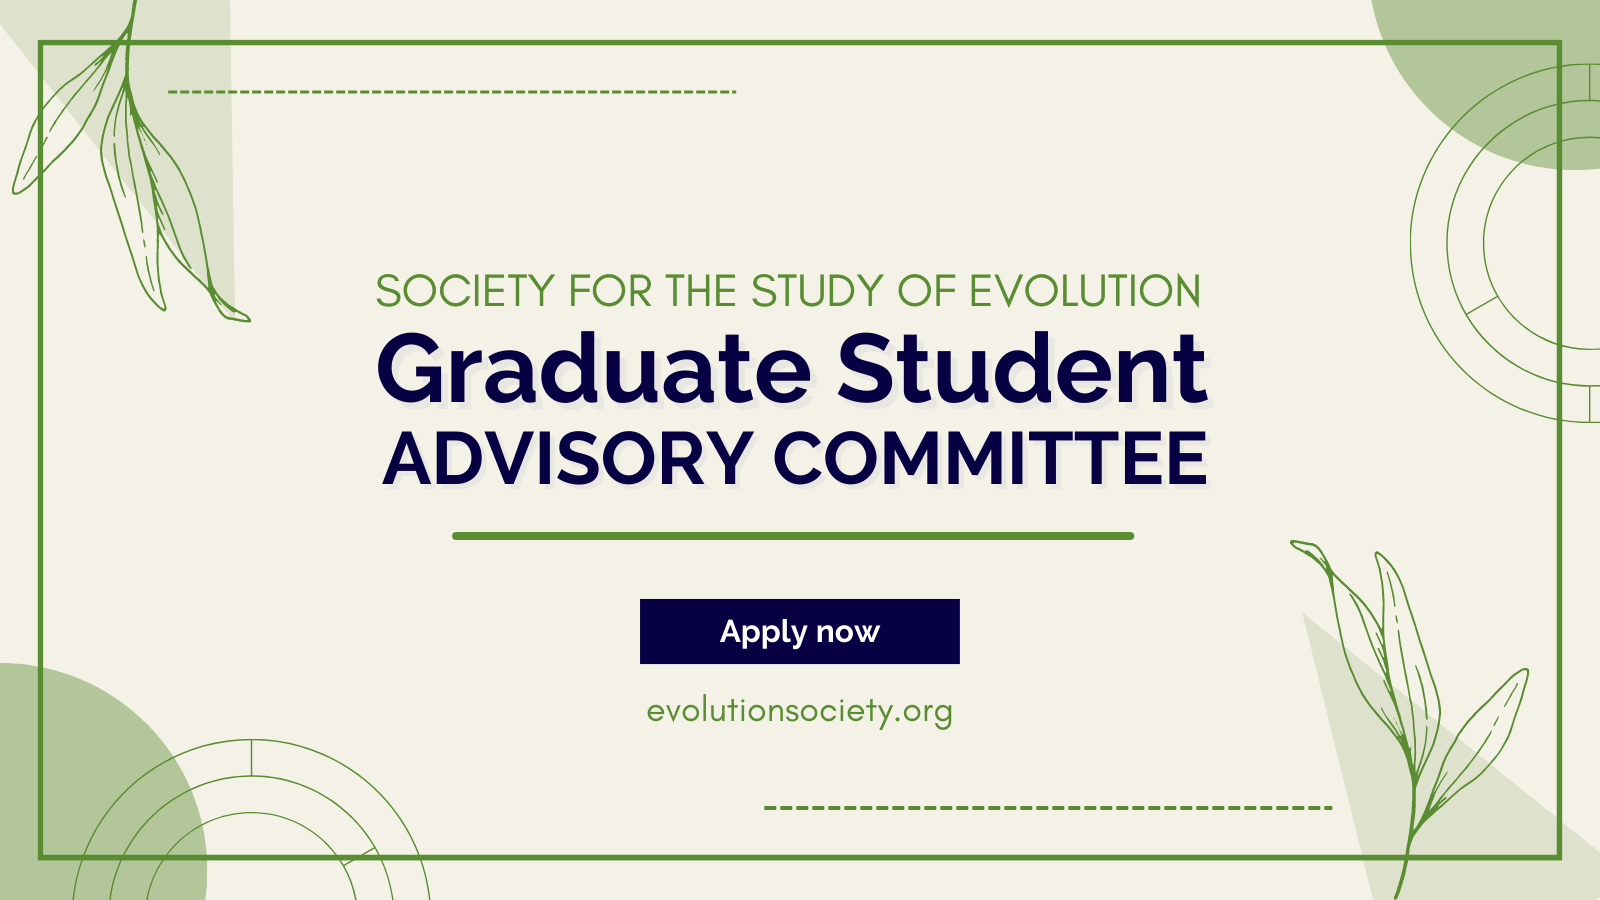 Text: Society for the Study of Evolution Graduate Student Advisory Committee, Apply now, evolutionsociety.org.